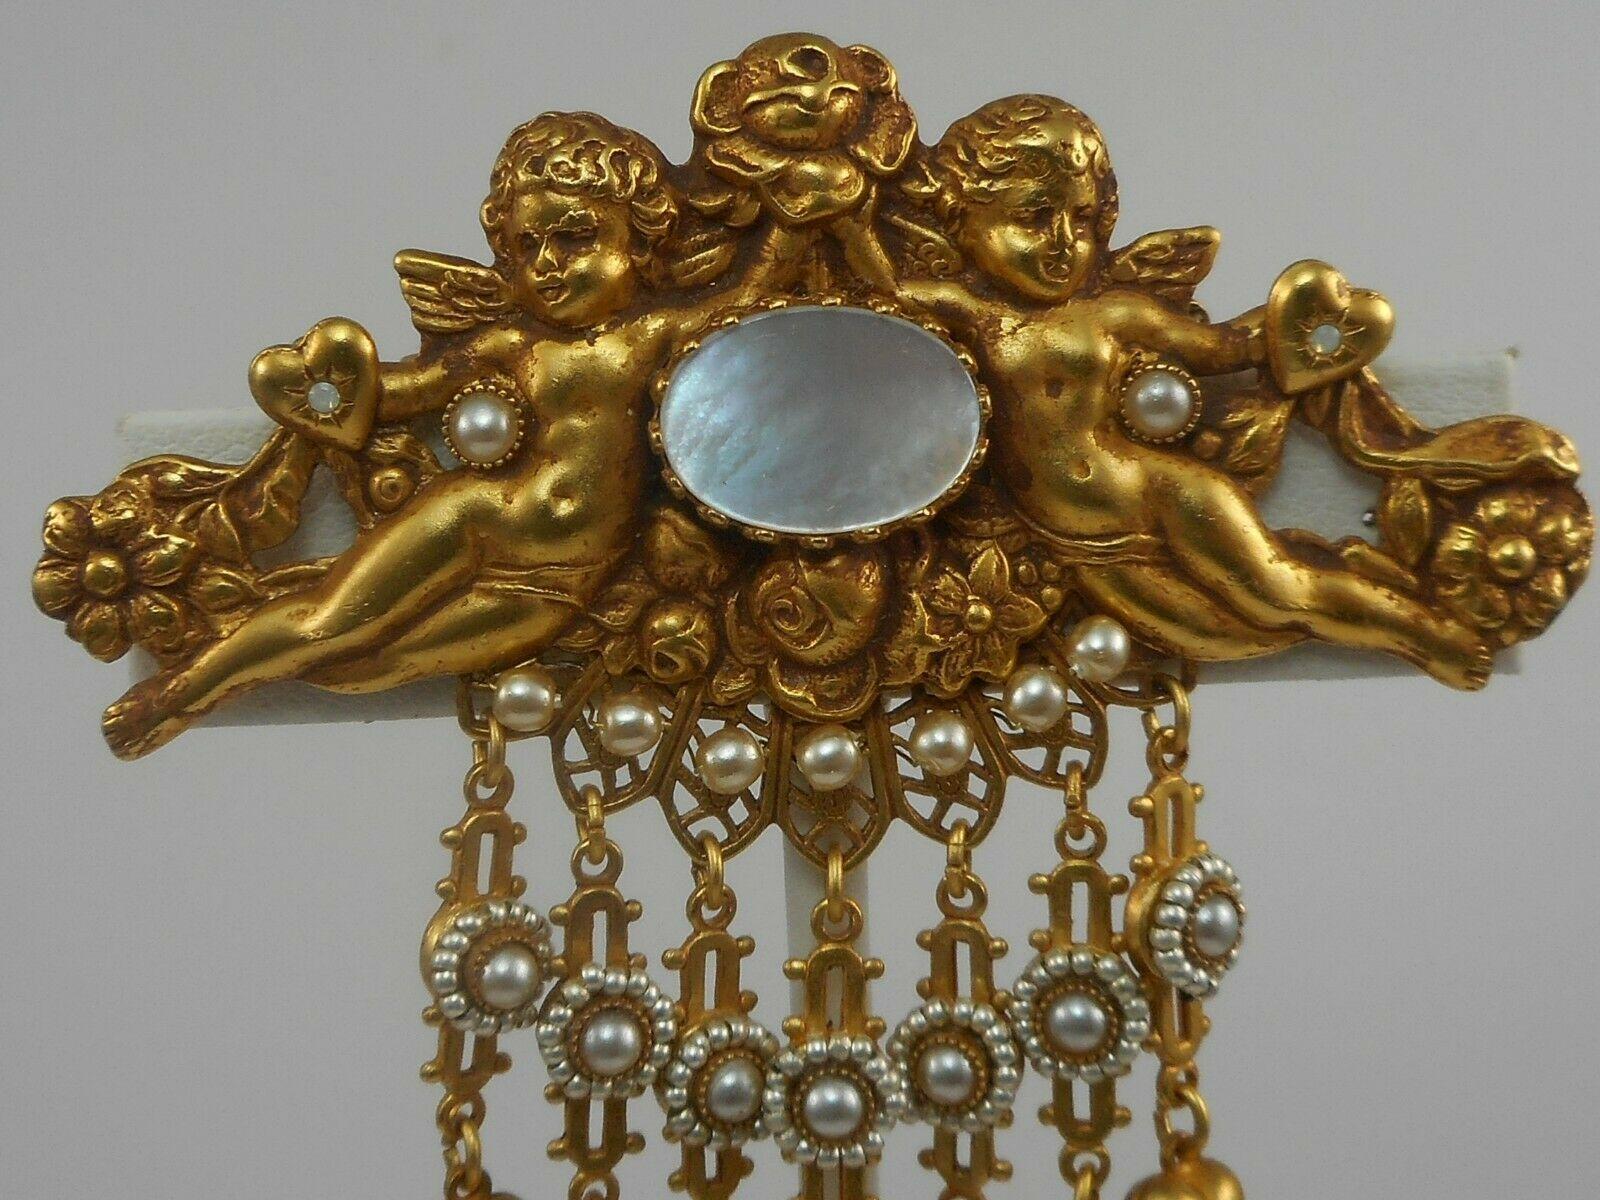 Simply Fabulous! Askew London Vintage Brooch featuring a pair of Cherubs amid Hearts and Flowers and an oval Mother of Pearl medallion, suspending seven flexible bars decorated with Hearts, enhanced with Faux Pearl Beads, edged with tiny faceted